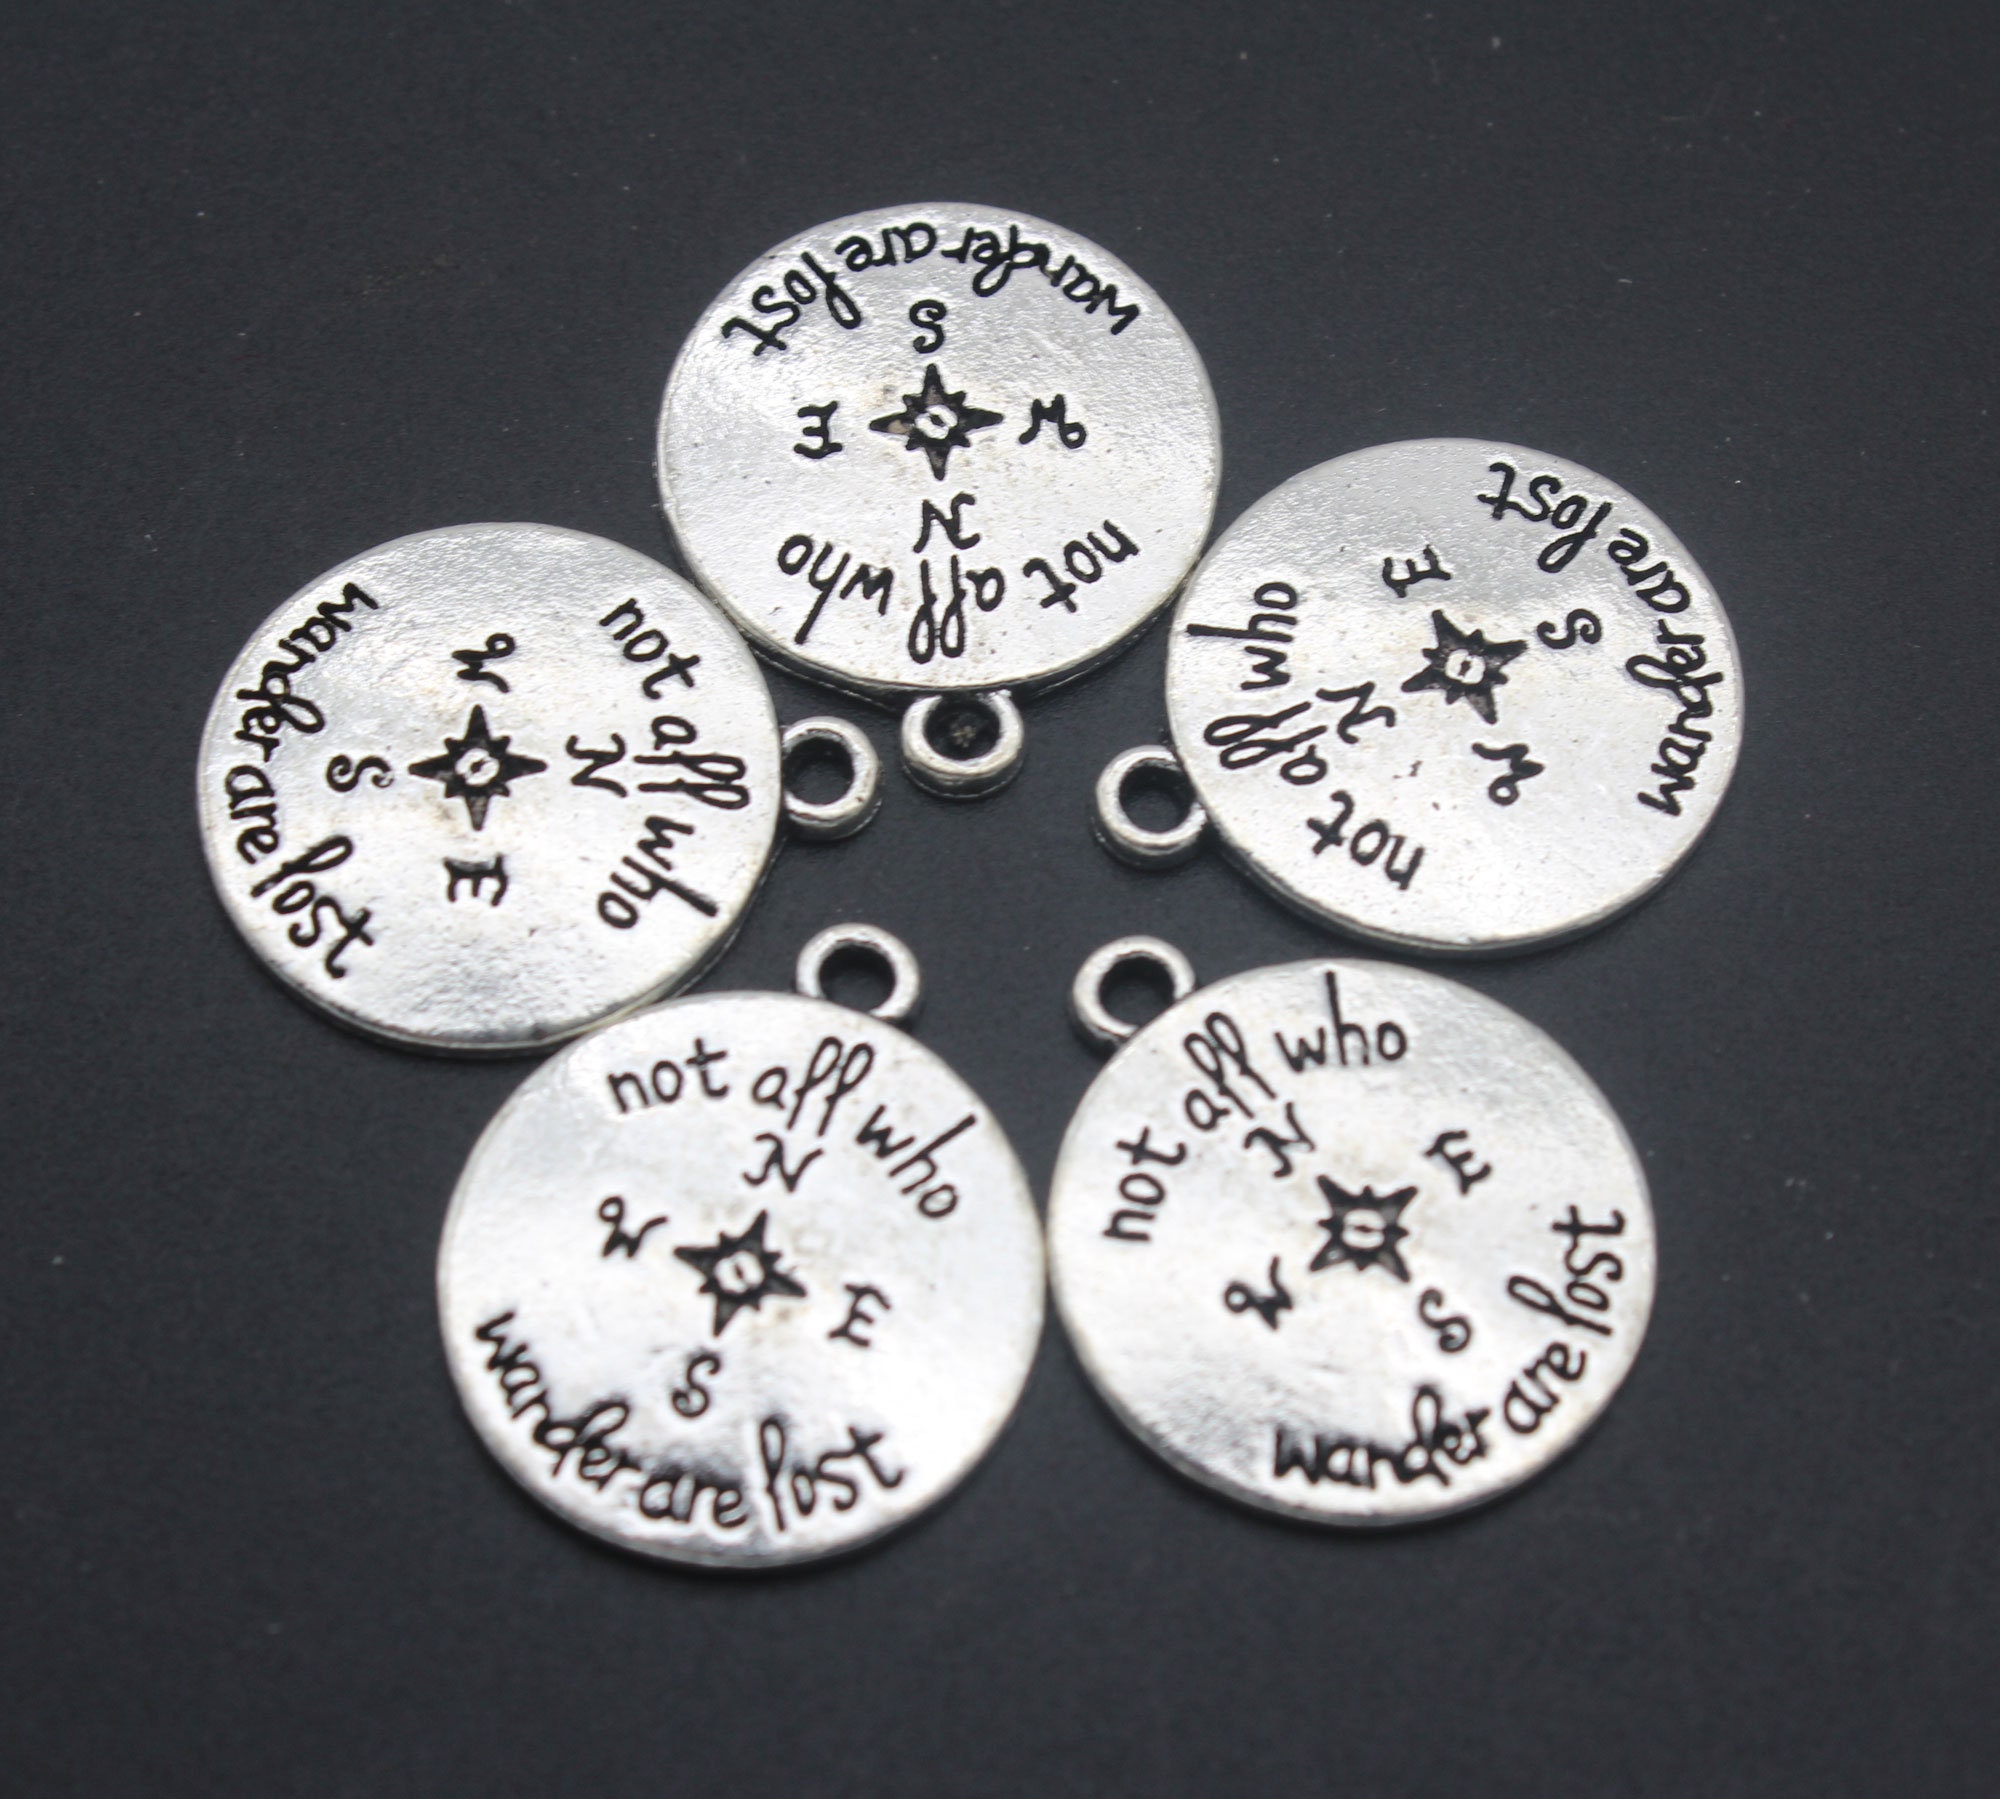 5 Pcs-Not All Who Wander Are Lost Charm Pendant, Compass Charm, Alloy Charm, Bulk Charm-19MYf222